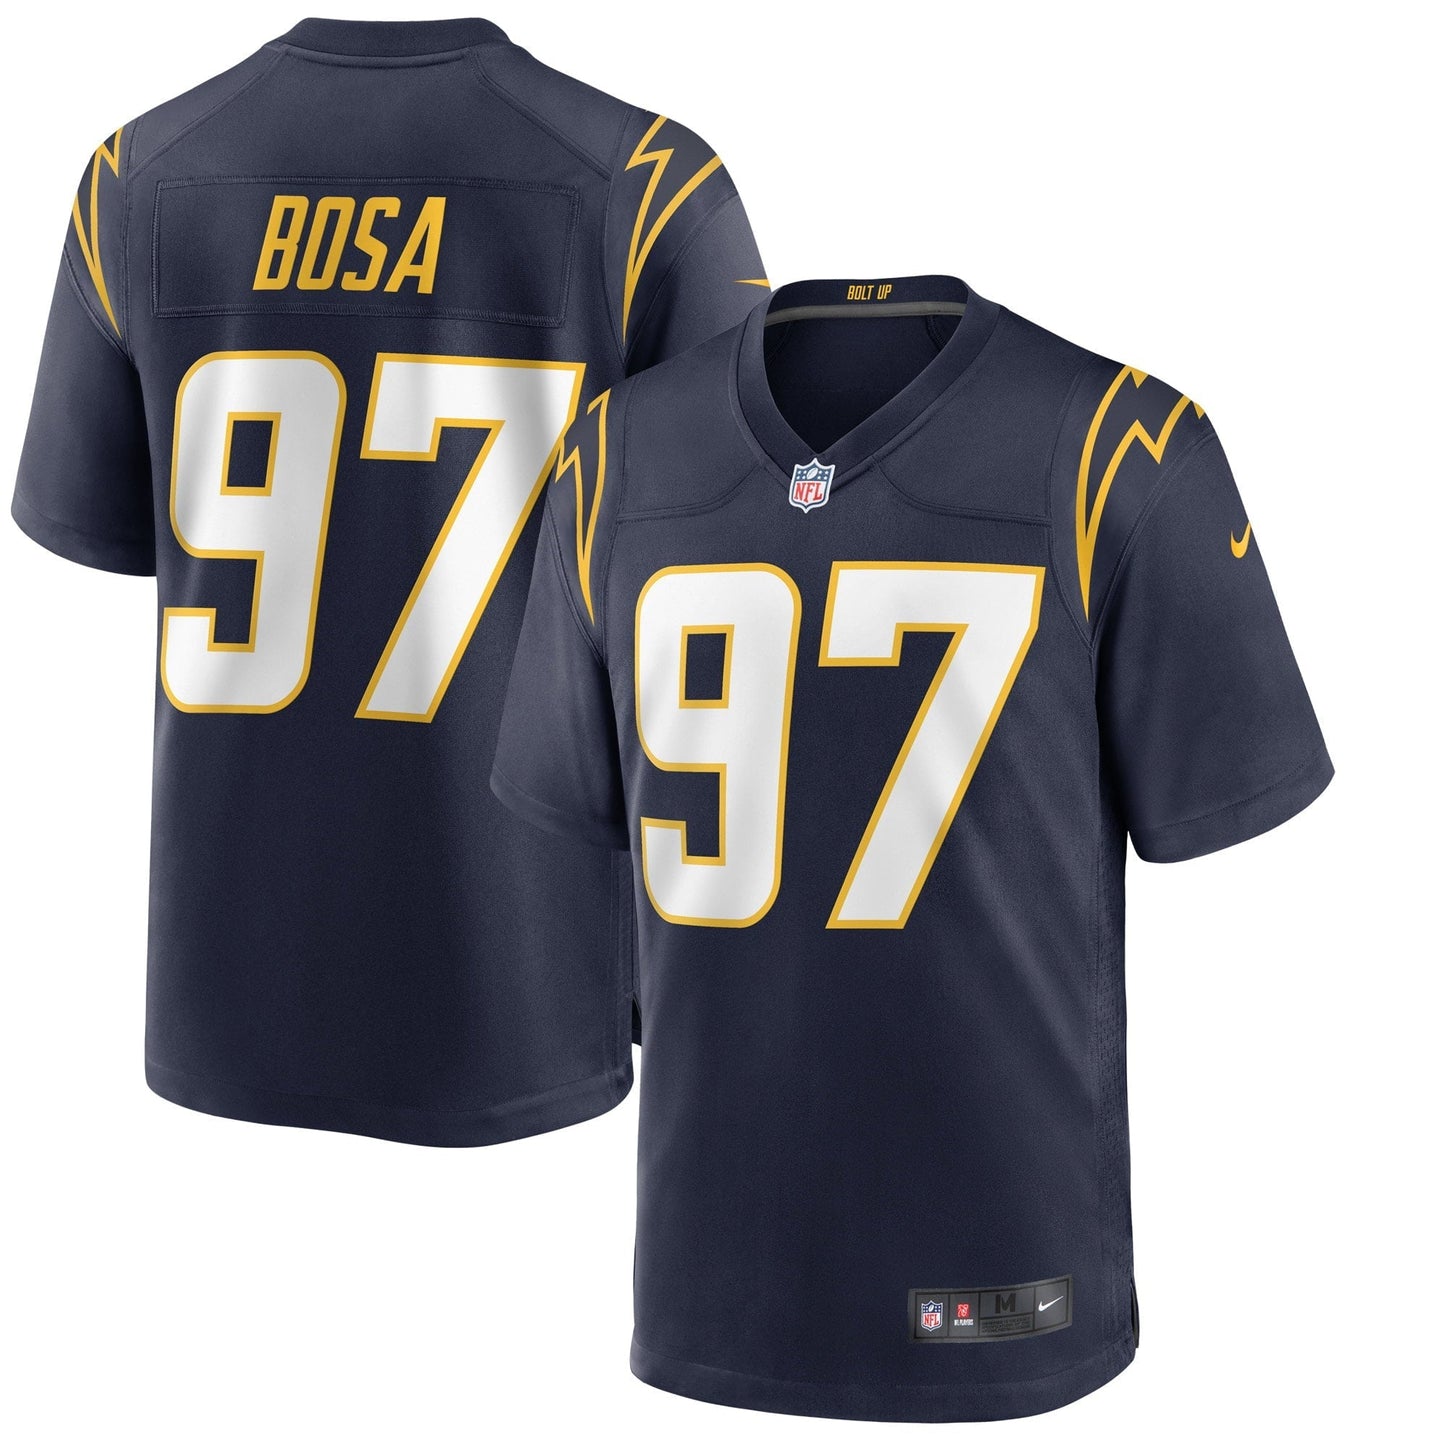 Men's Nike Joey Bosa Navy Los Angeles Chargers Alternate Game Jersey